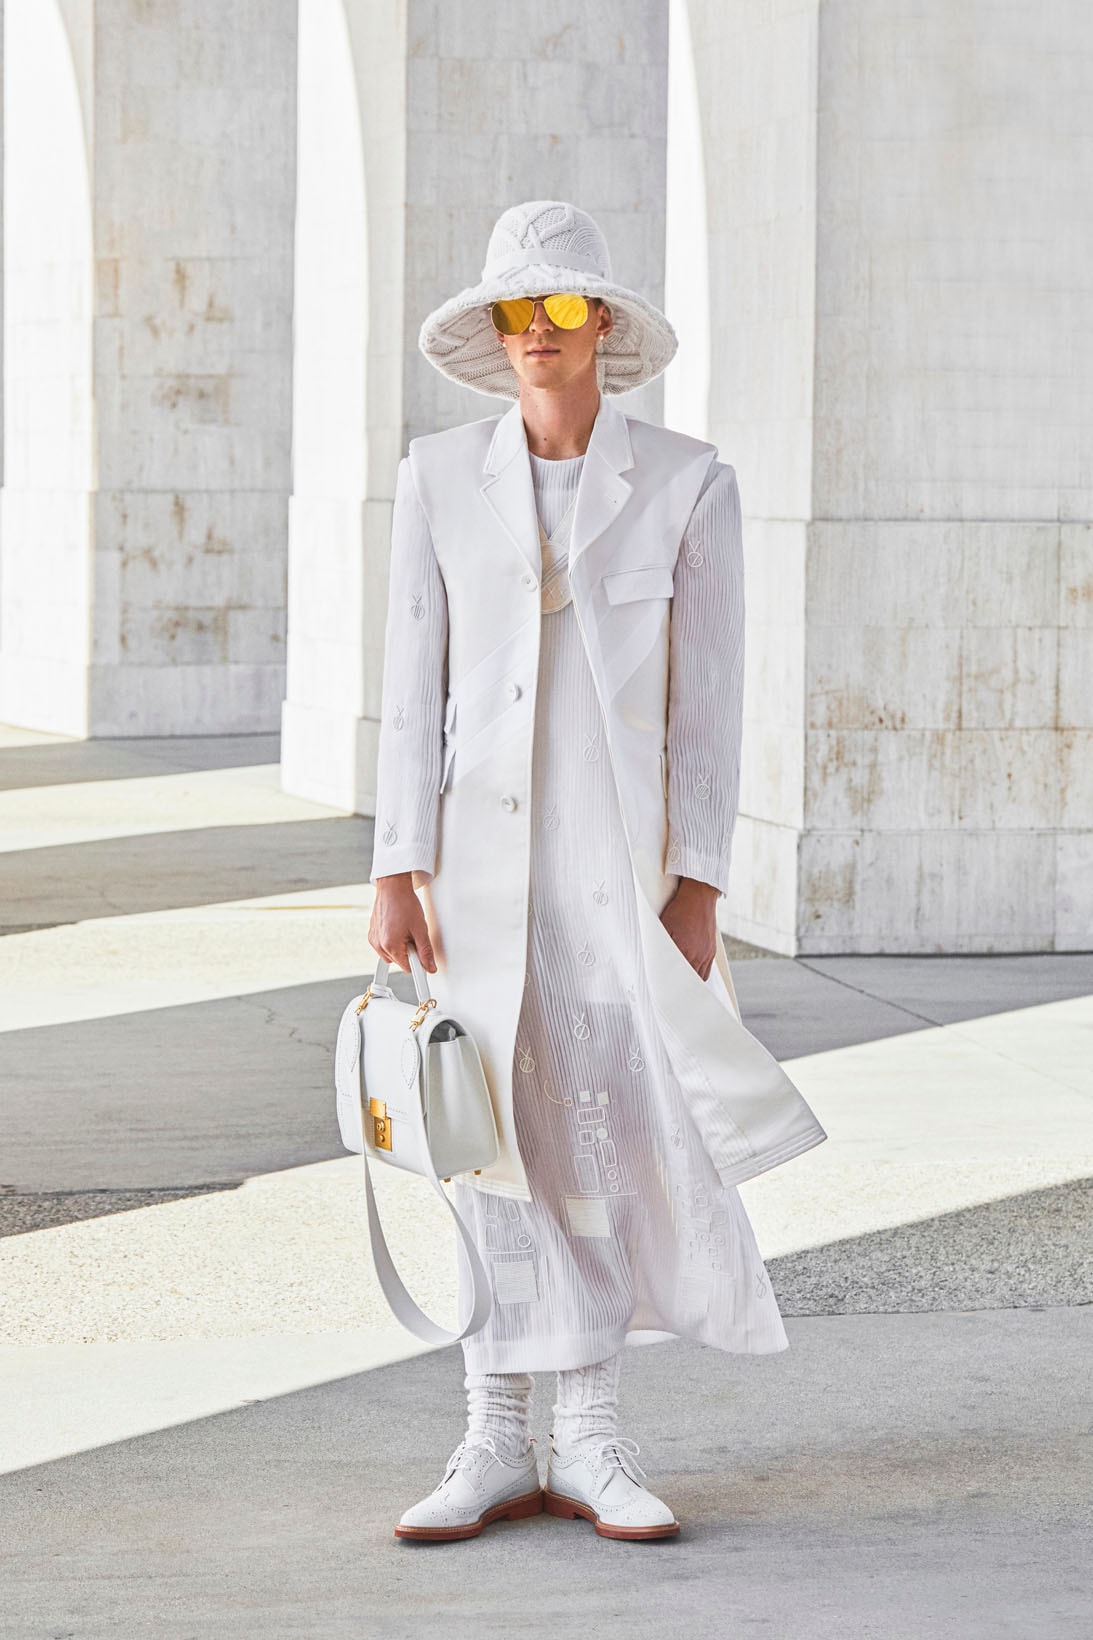 thom browne spring summer 2021 olympics all white oversized suits pleated skirts knitwear lookbook 